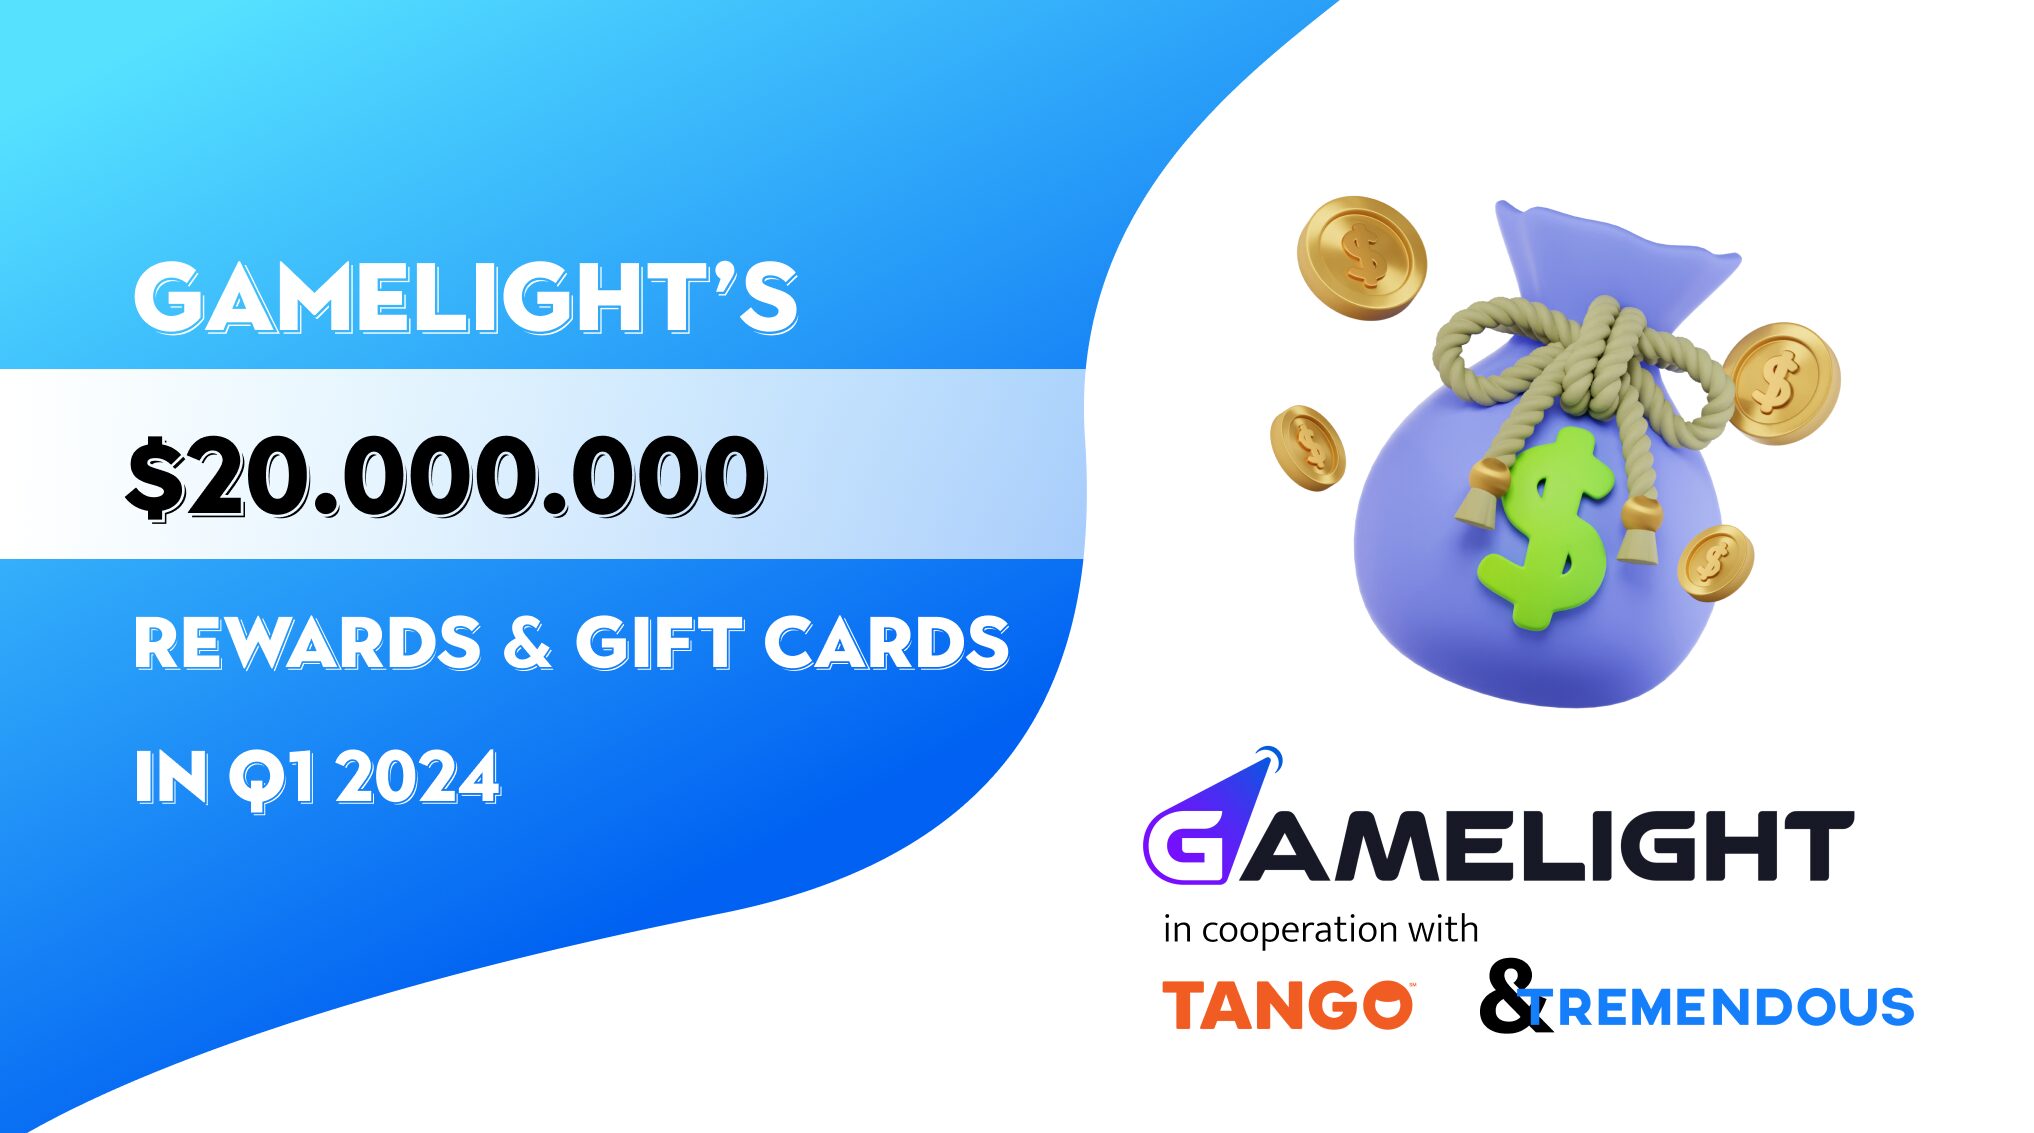 Gamelight Has Already Given $20 Million in Rewards to their Players in 2024